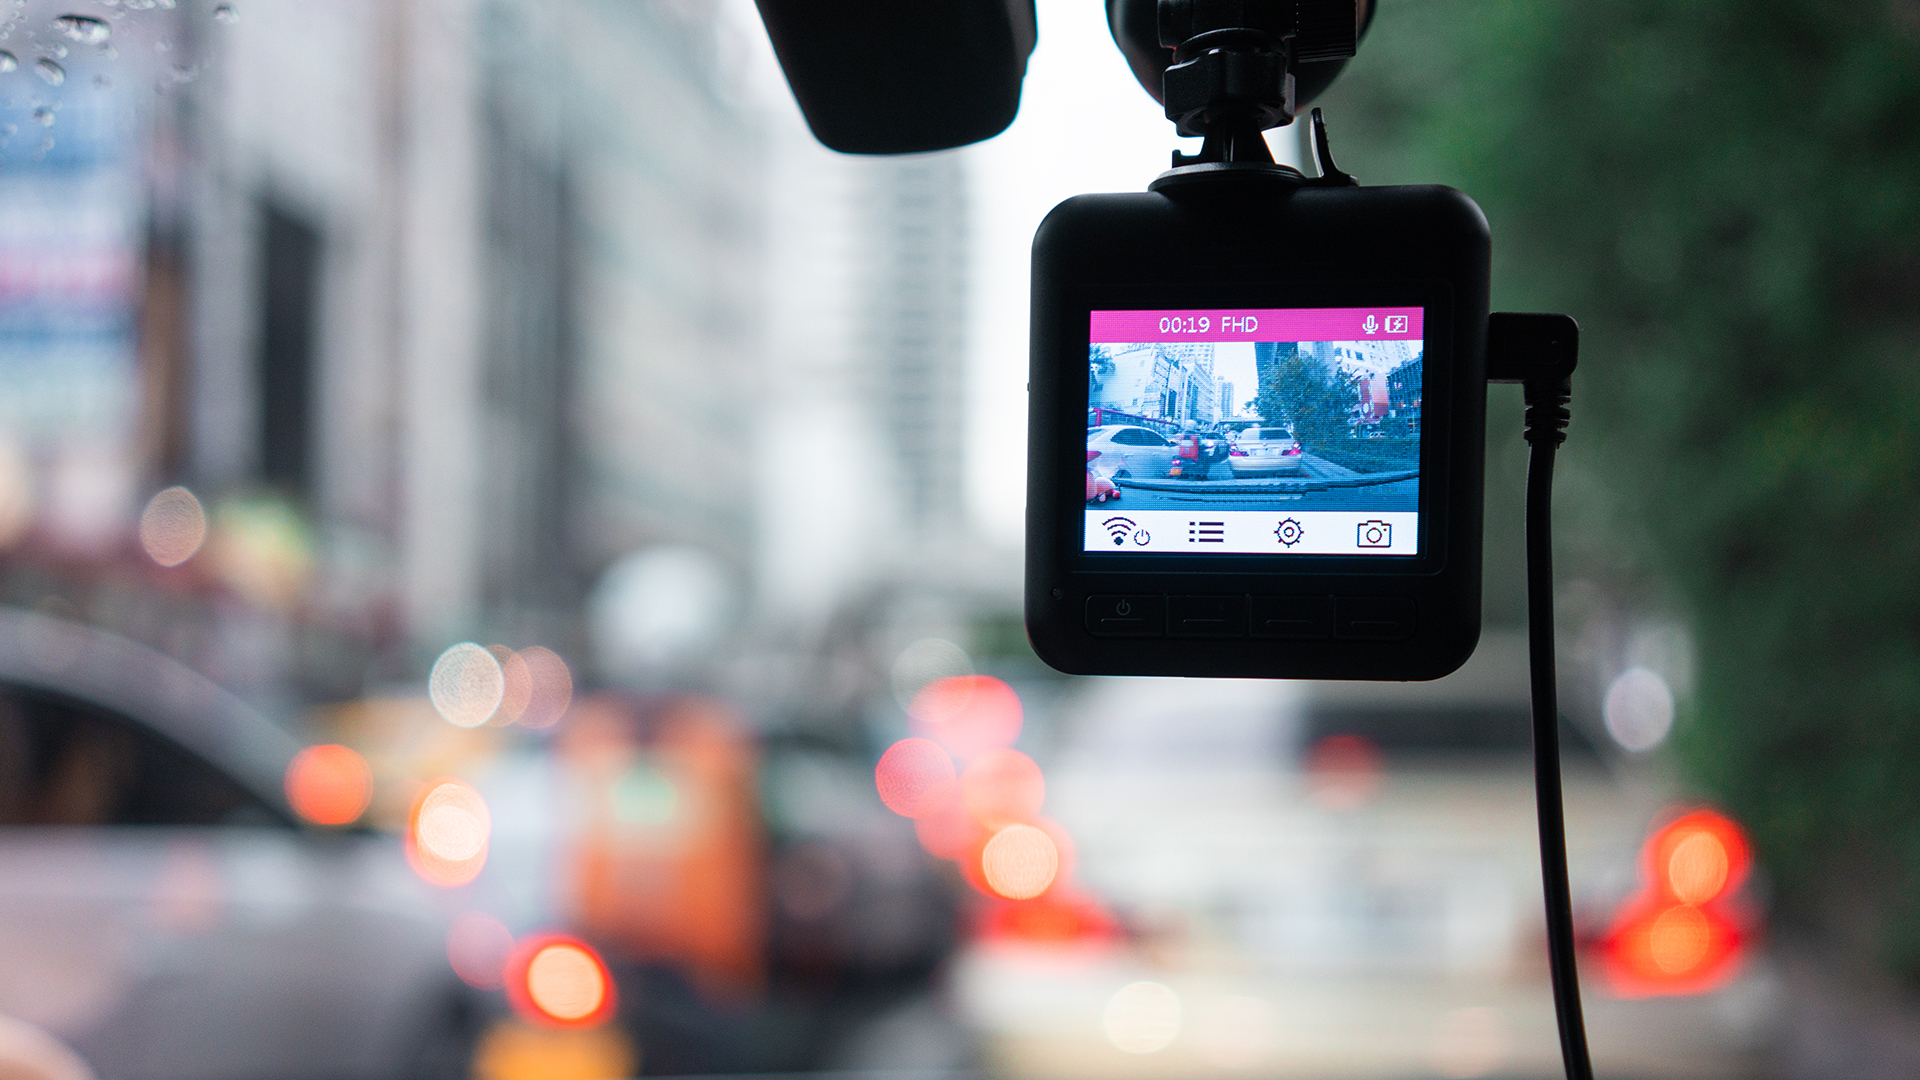 Guidemaster: The best dash cams worthy of a permanent place in